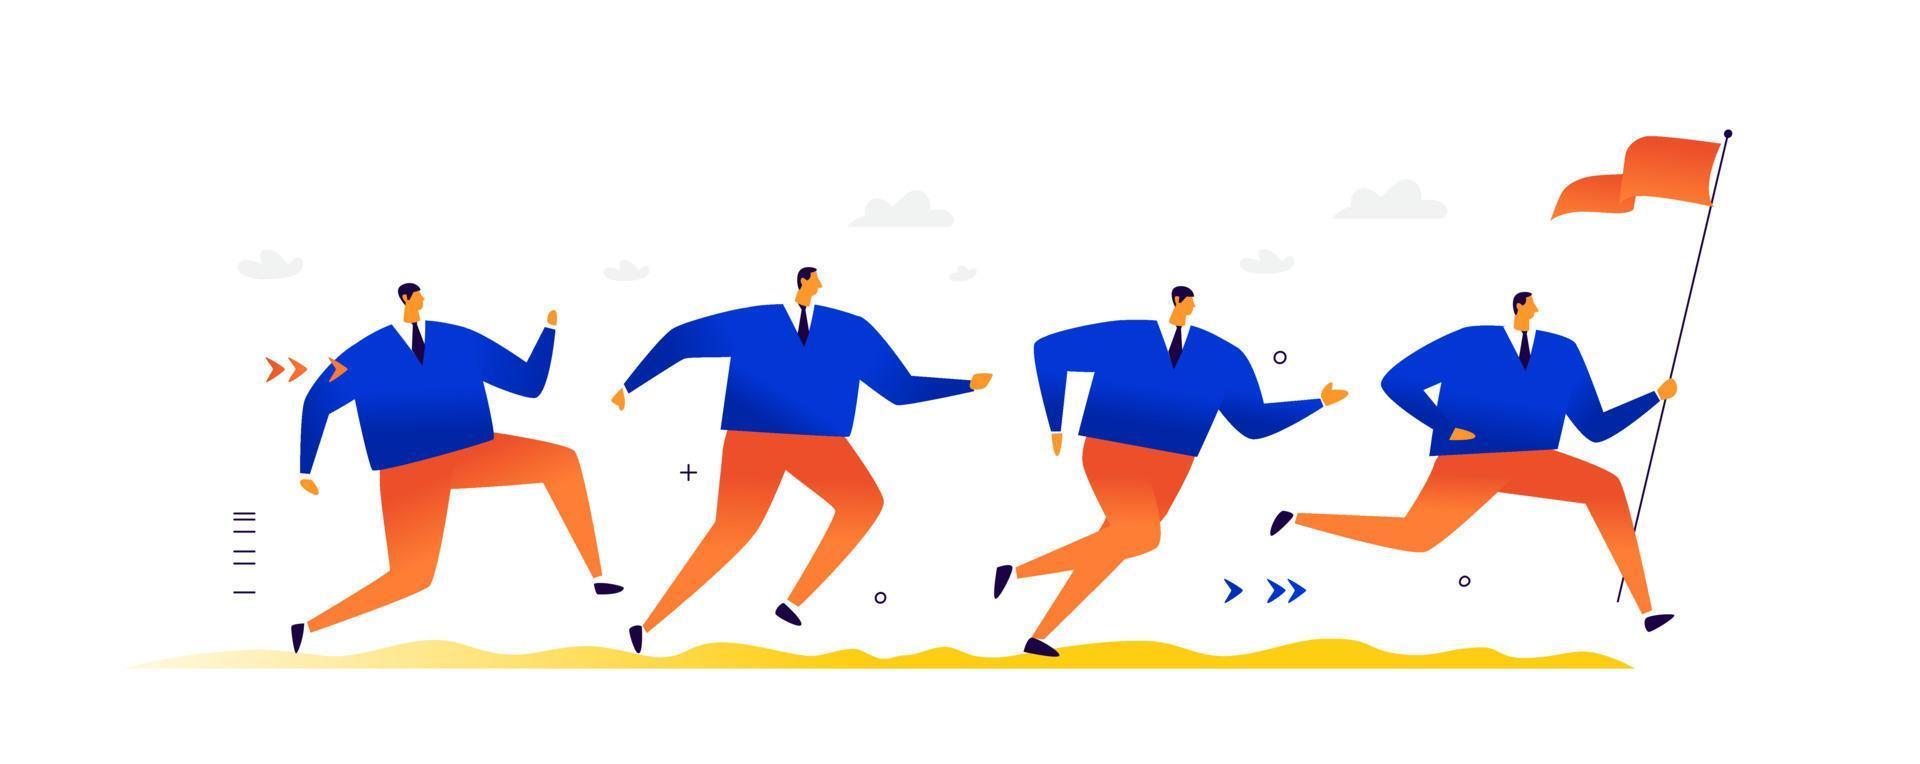 Illustration of running businessmen. A crowd of men runs after a leader, an alpha male carrying a flag, a banner. Flat illustration. Competition and competition in business and in life. vector